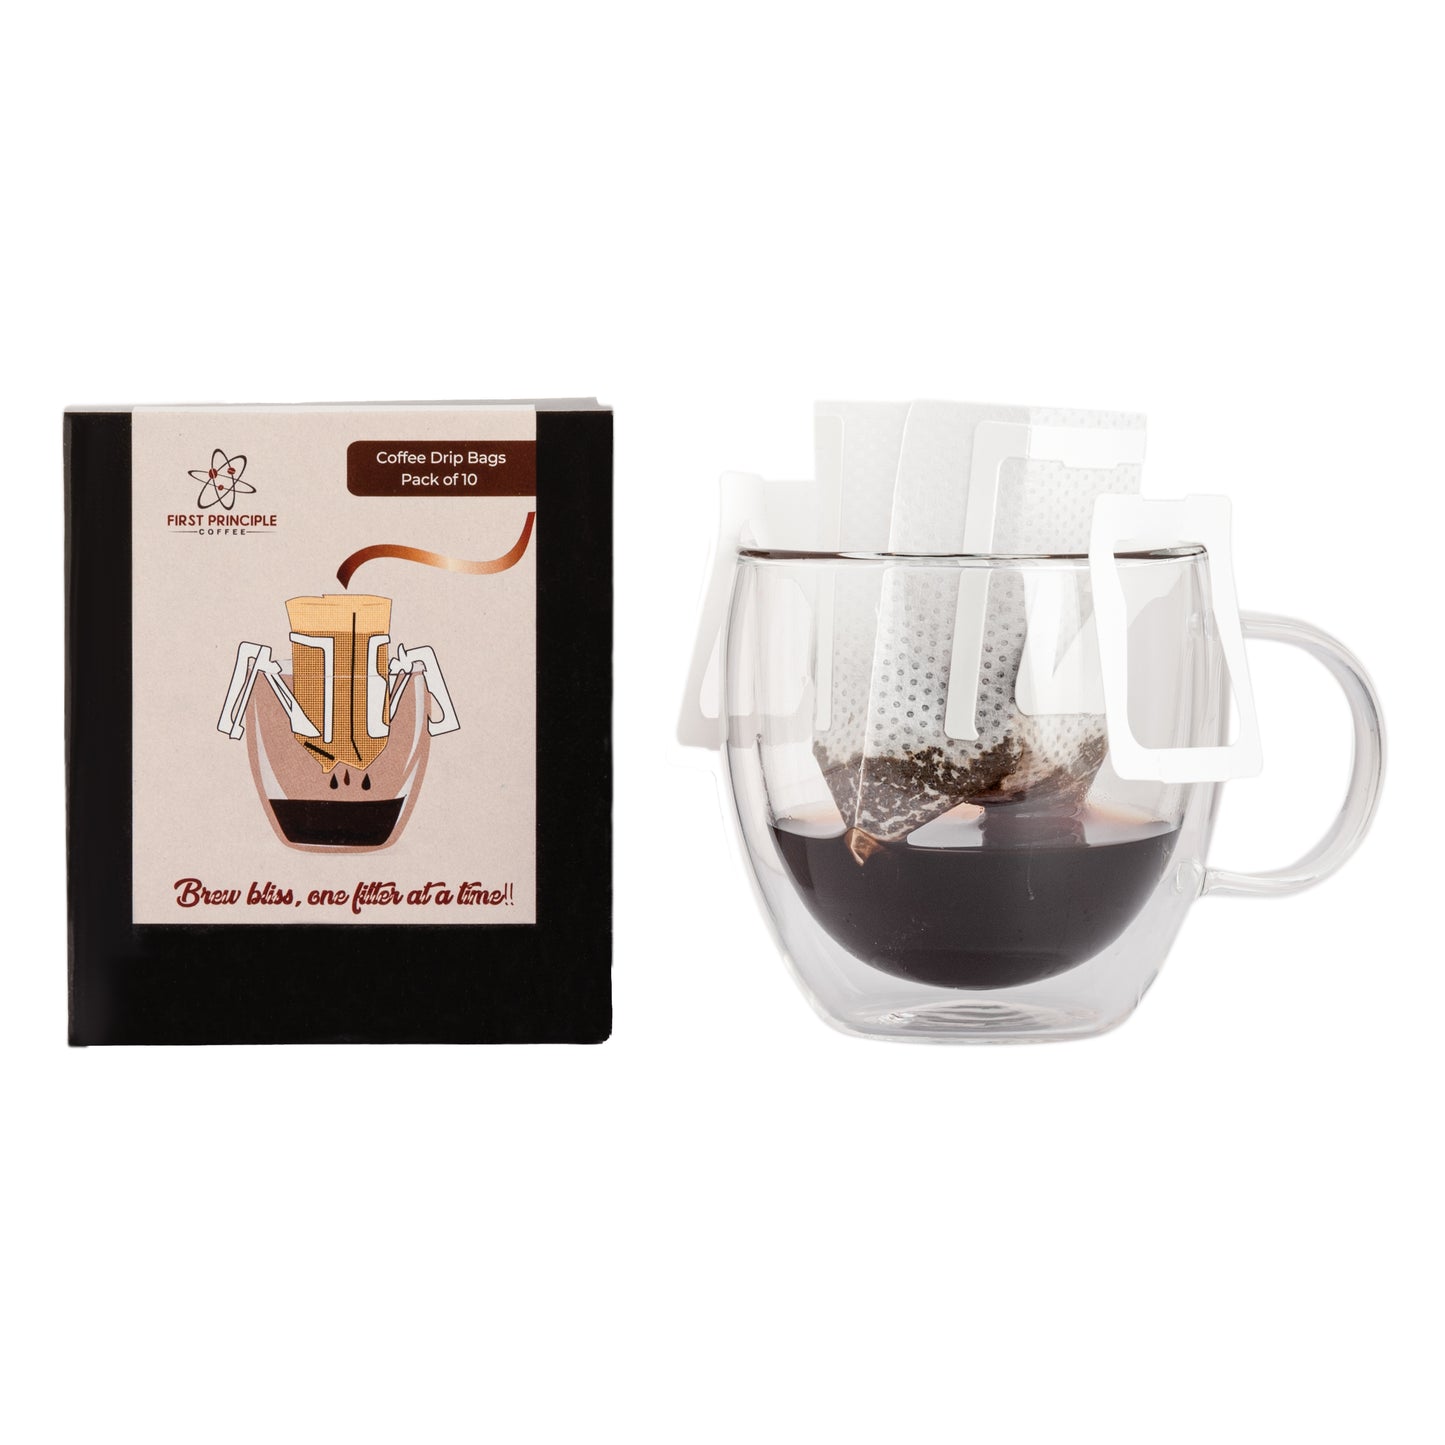 First Principle Coffee Gift Set -250 gms. pouch